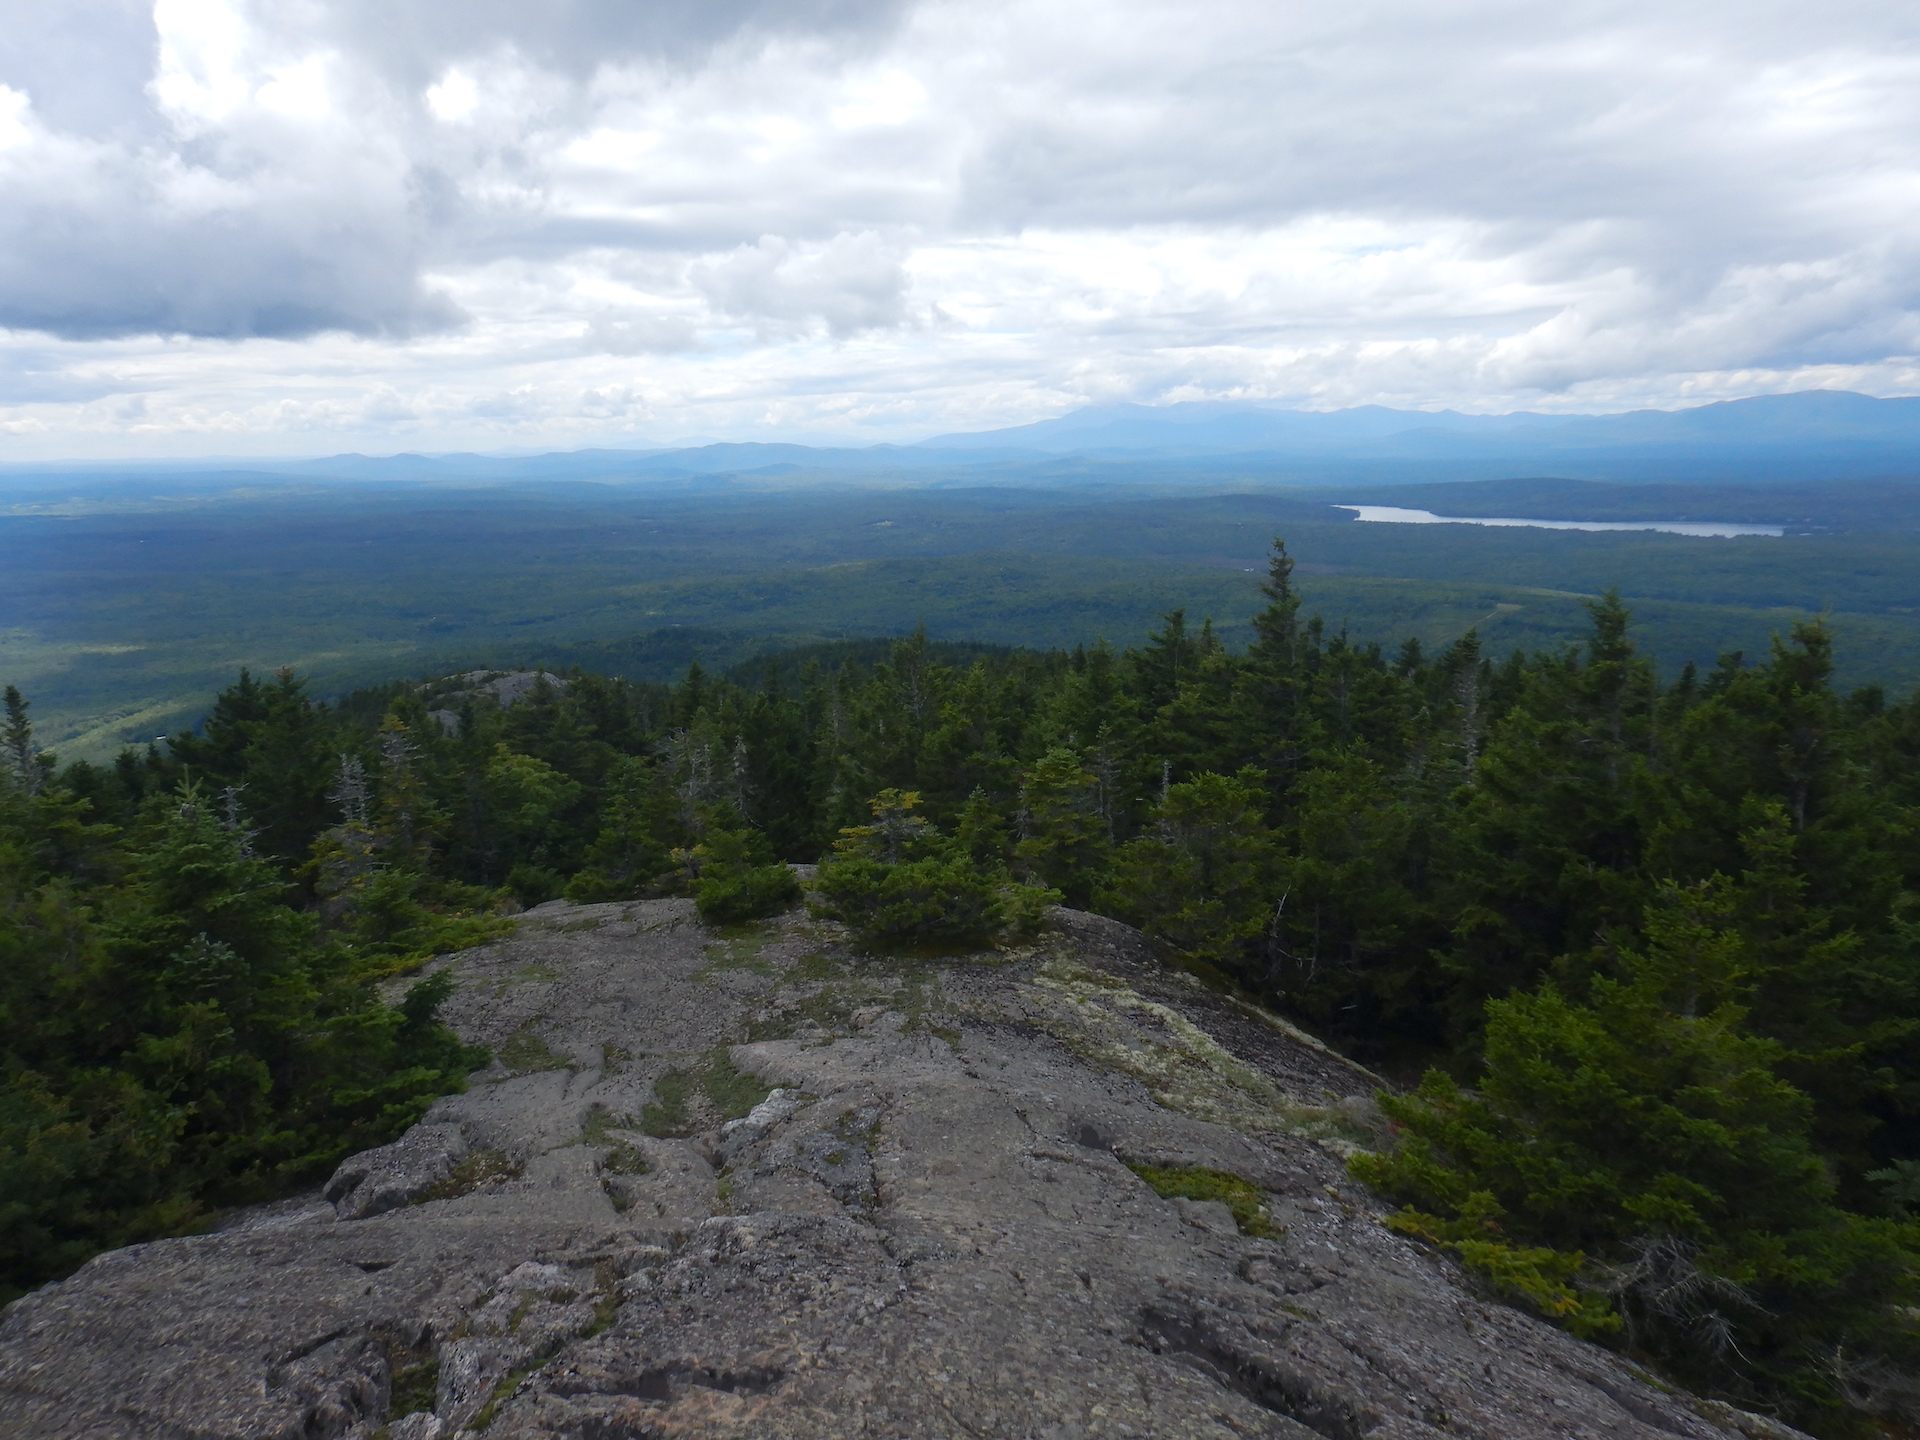 View of forested landscape from mountain summit. Bare rock covers the ground at bottom while spruce and fir trees cover the near slopes. The skies are mostly cloudy. Forest fills the lowlands. A pond and mountains can be seen near the horizon at center left.